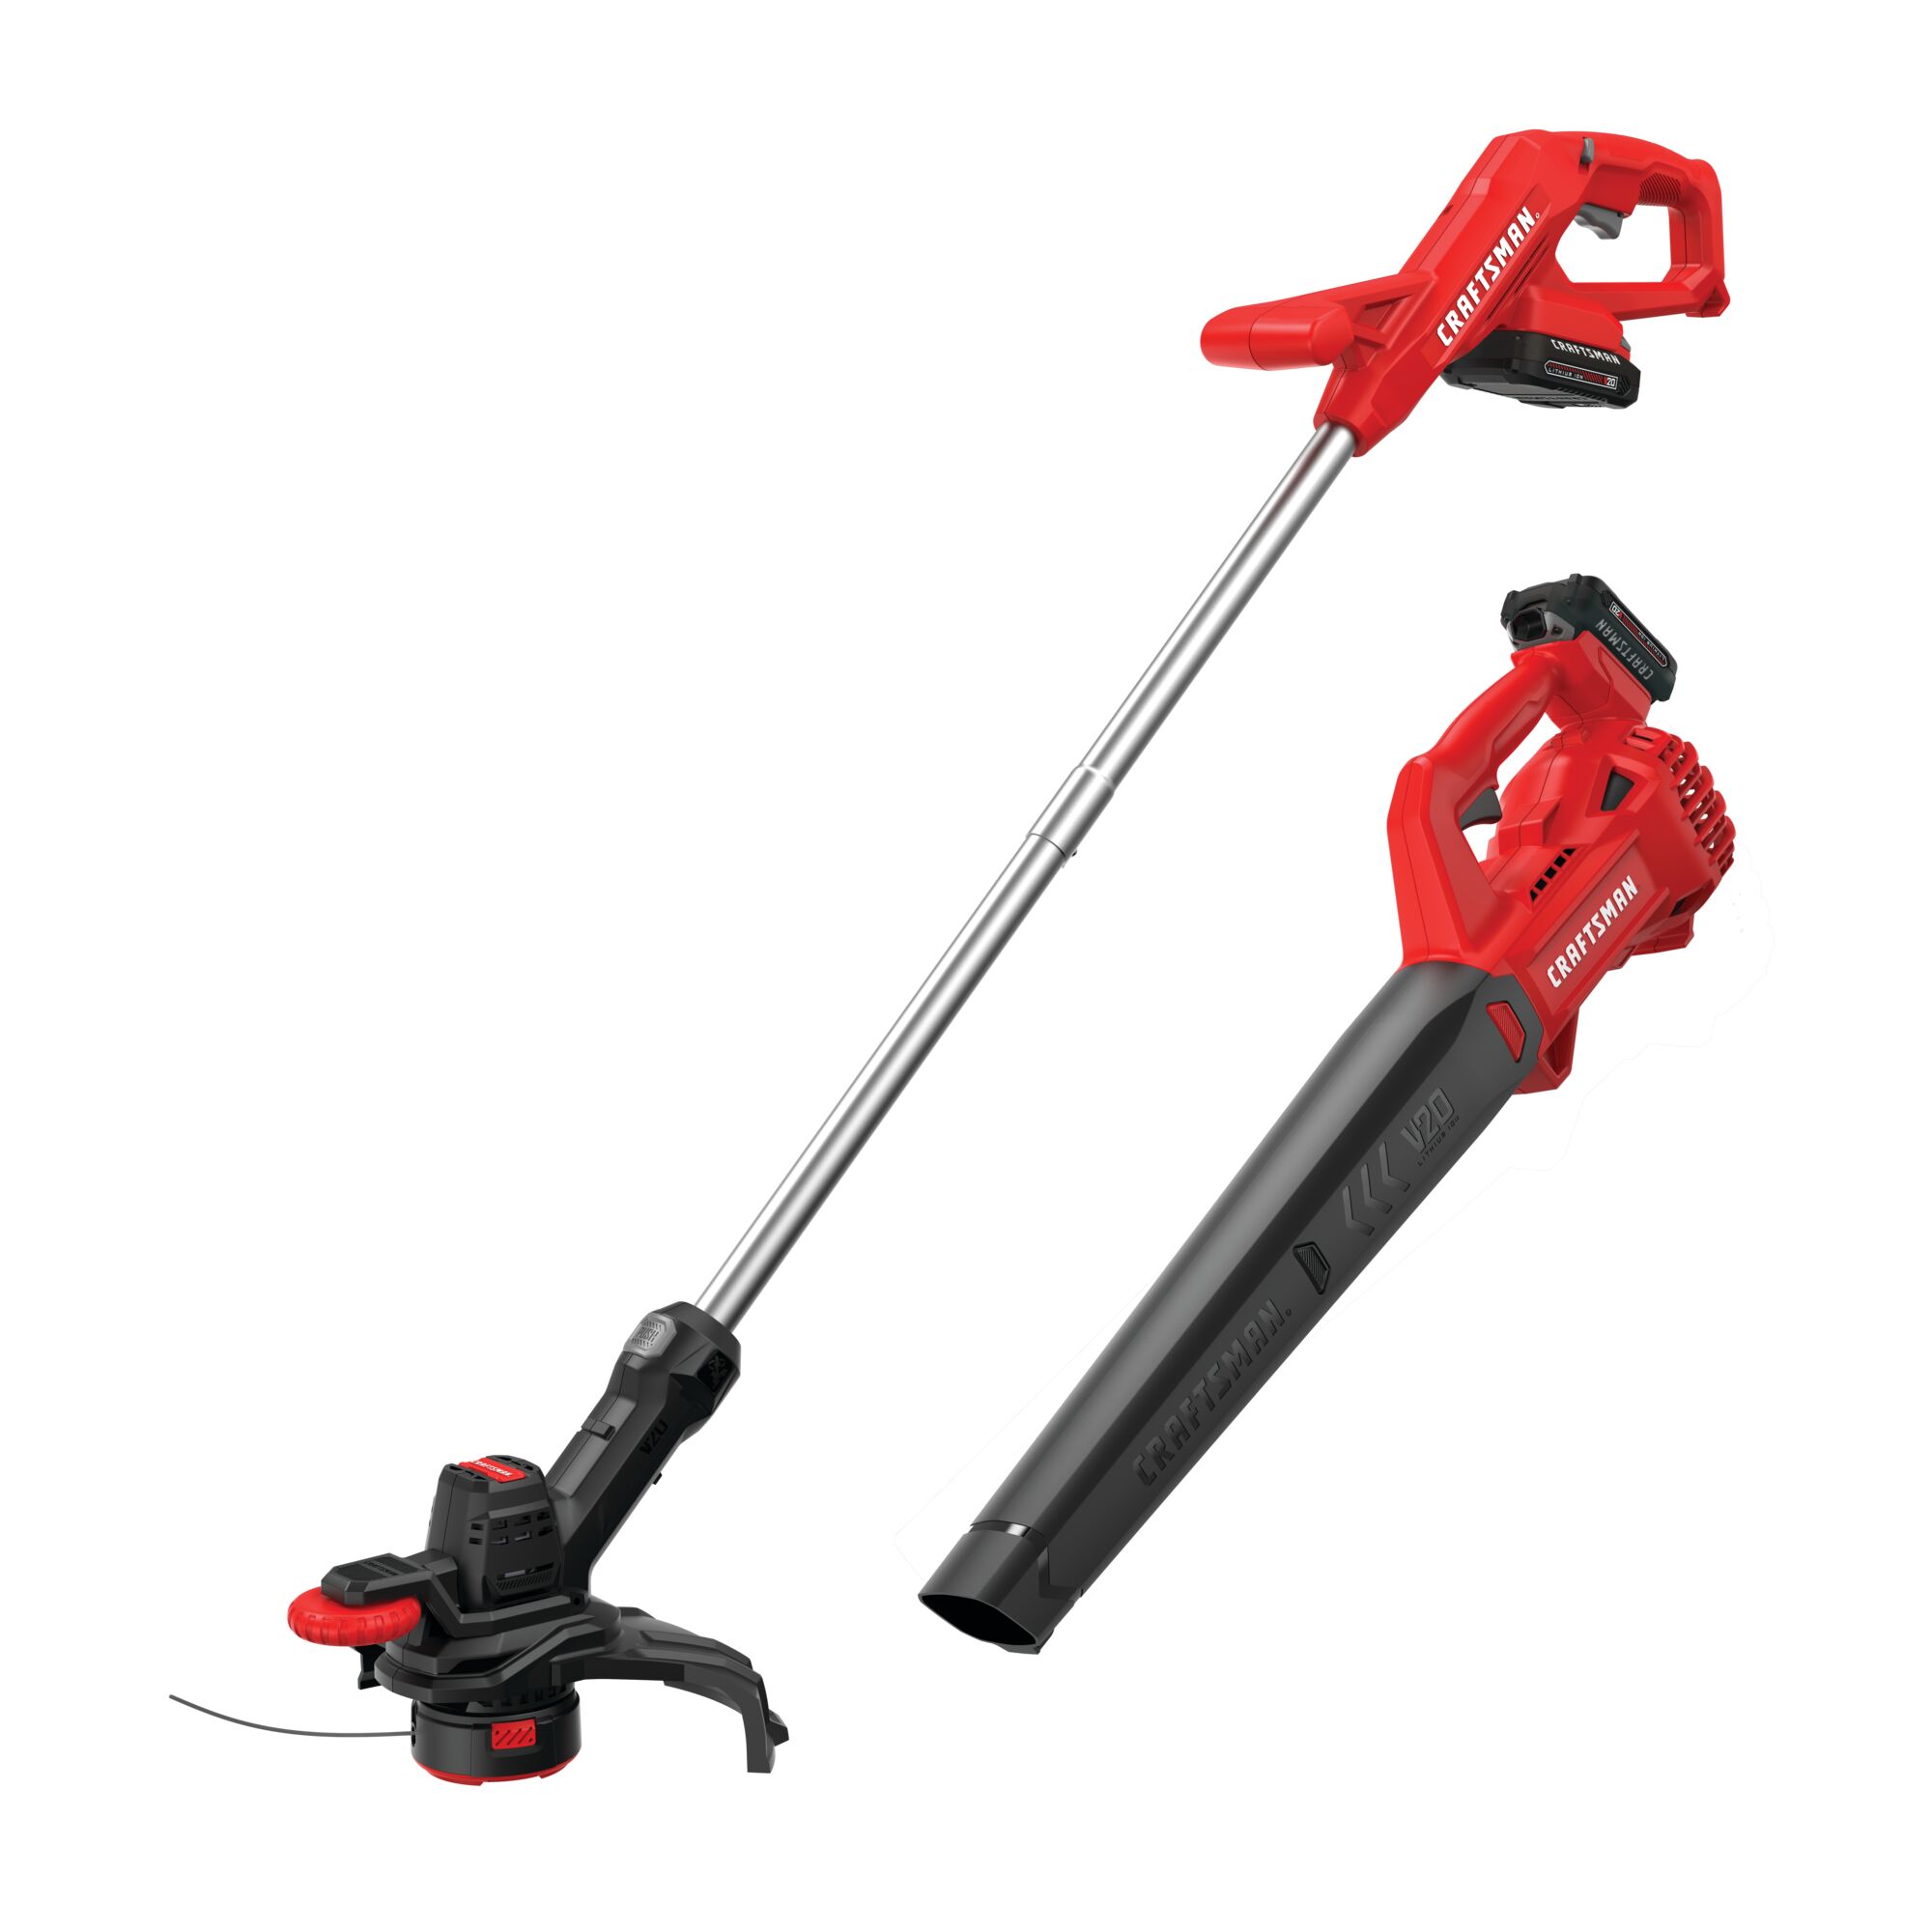 String trimmer and blower combo kit 1.5 Ampere hours.